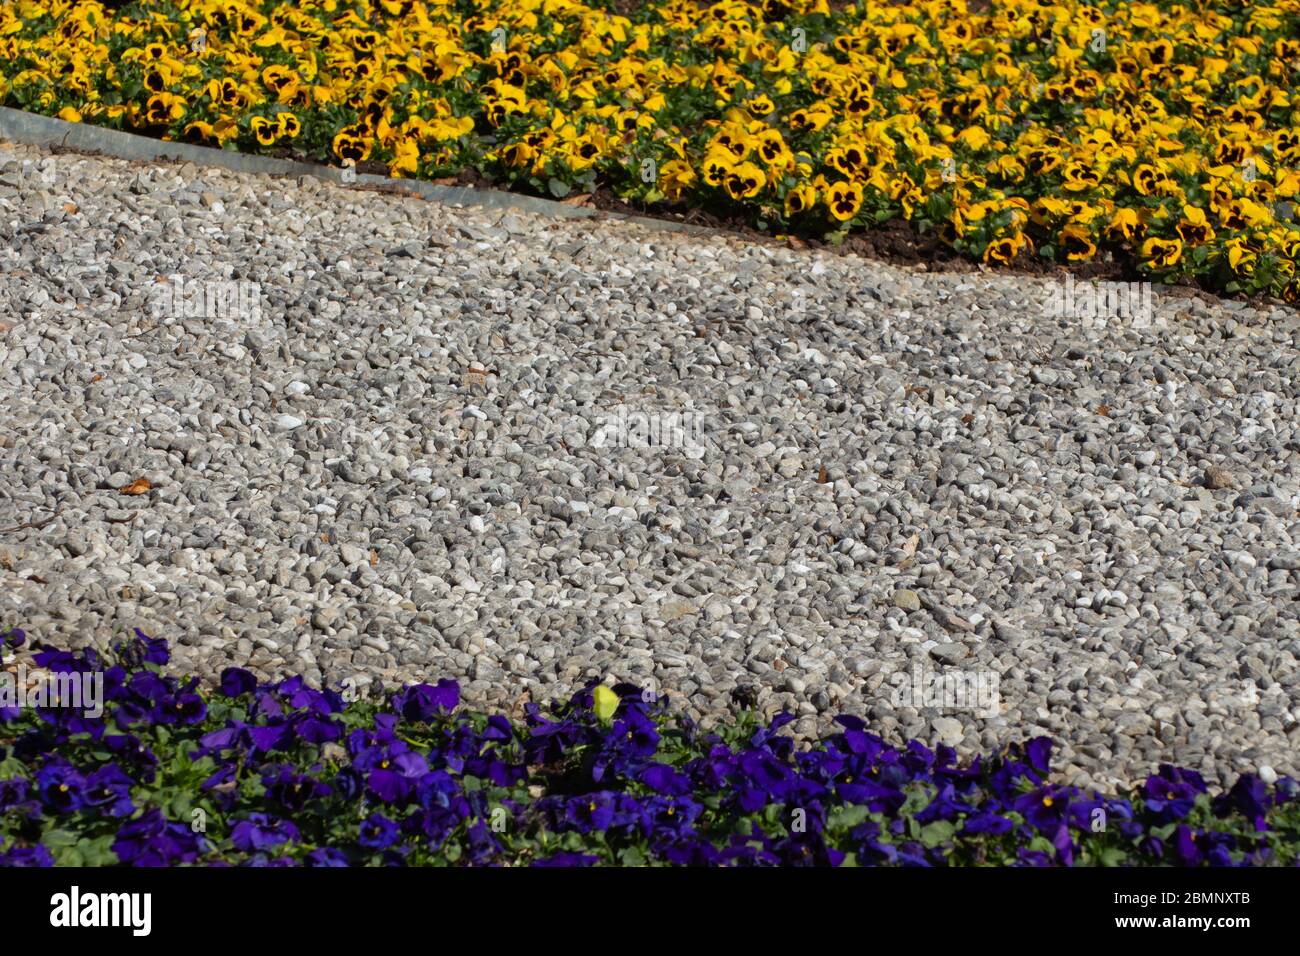 Metal edging separating gravel and blue and yellow pansies in a park, Viola tricolor Stock Photo